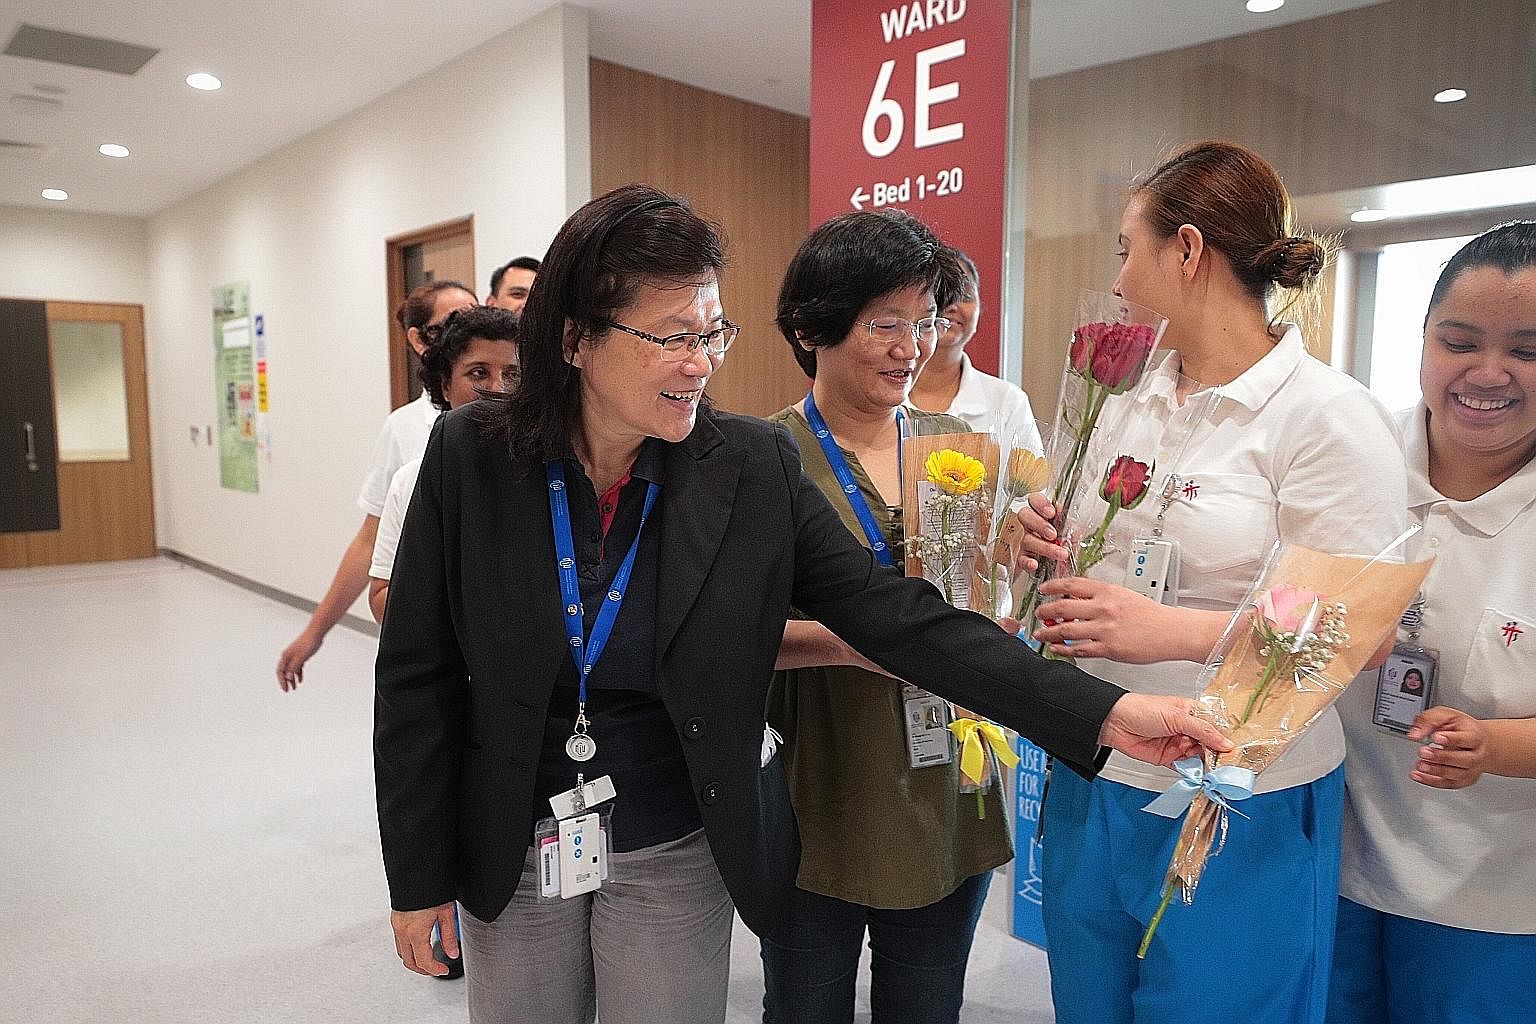 NCID executive director Leo Yee Sin with flowers for her staff from the public. With her are (from left) director of nursing Margaret Soon and nurses Ma. Olivia Valencia Valiente and Nurul Hazirah Subari.